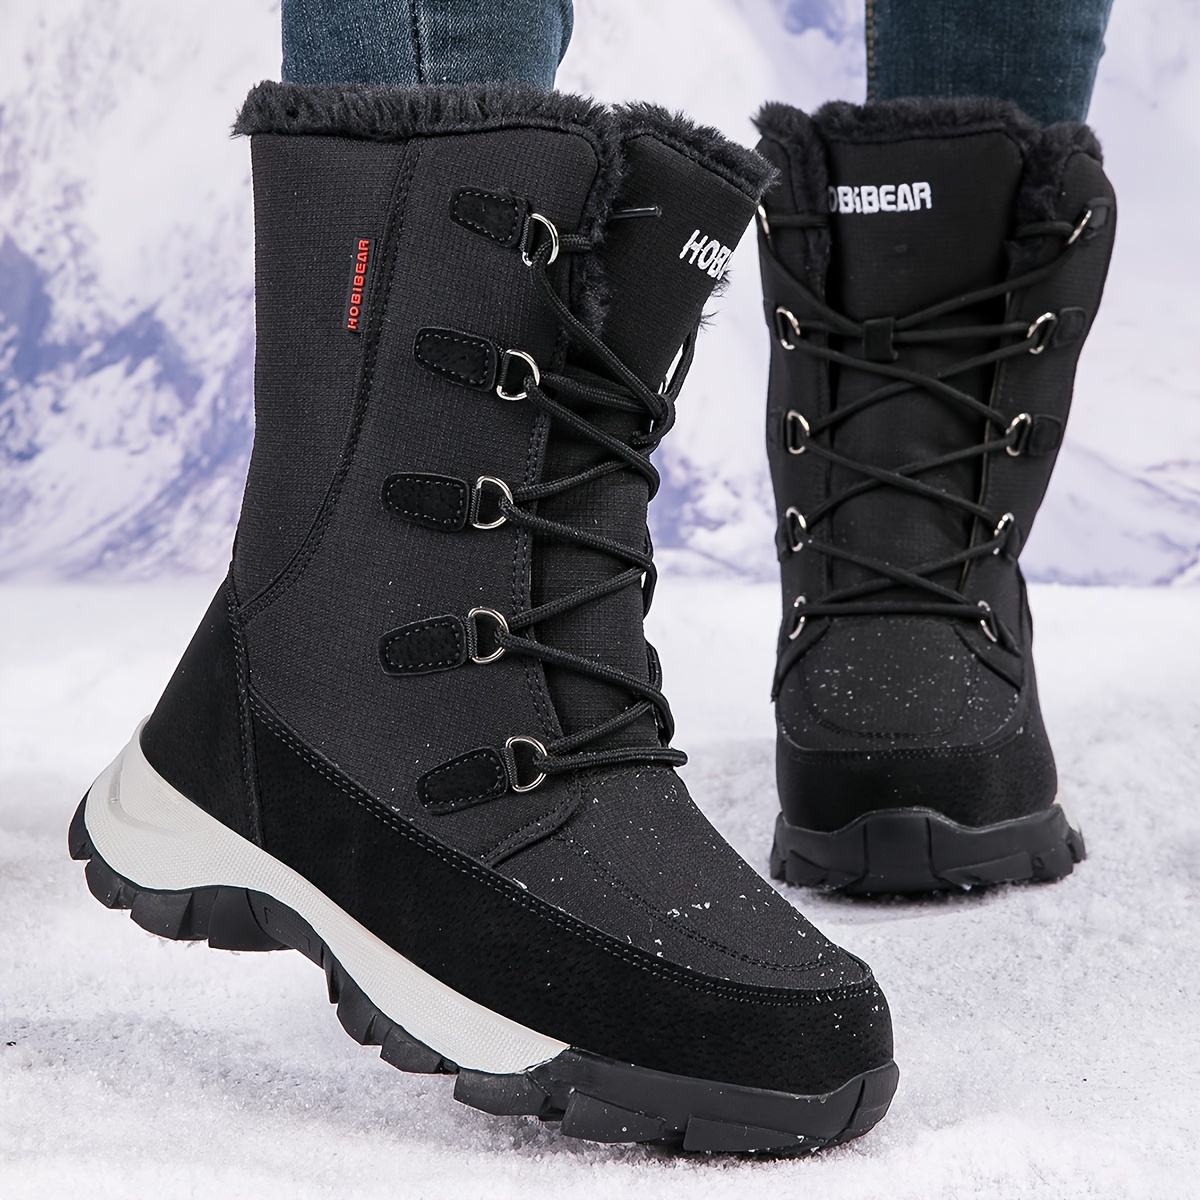 How to Style Black Moon Boots for School